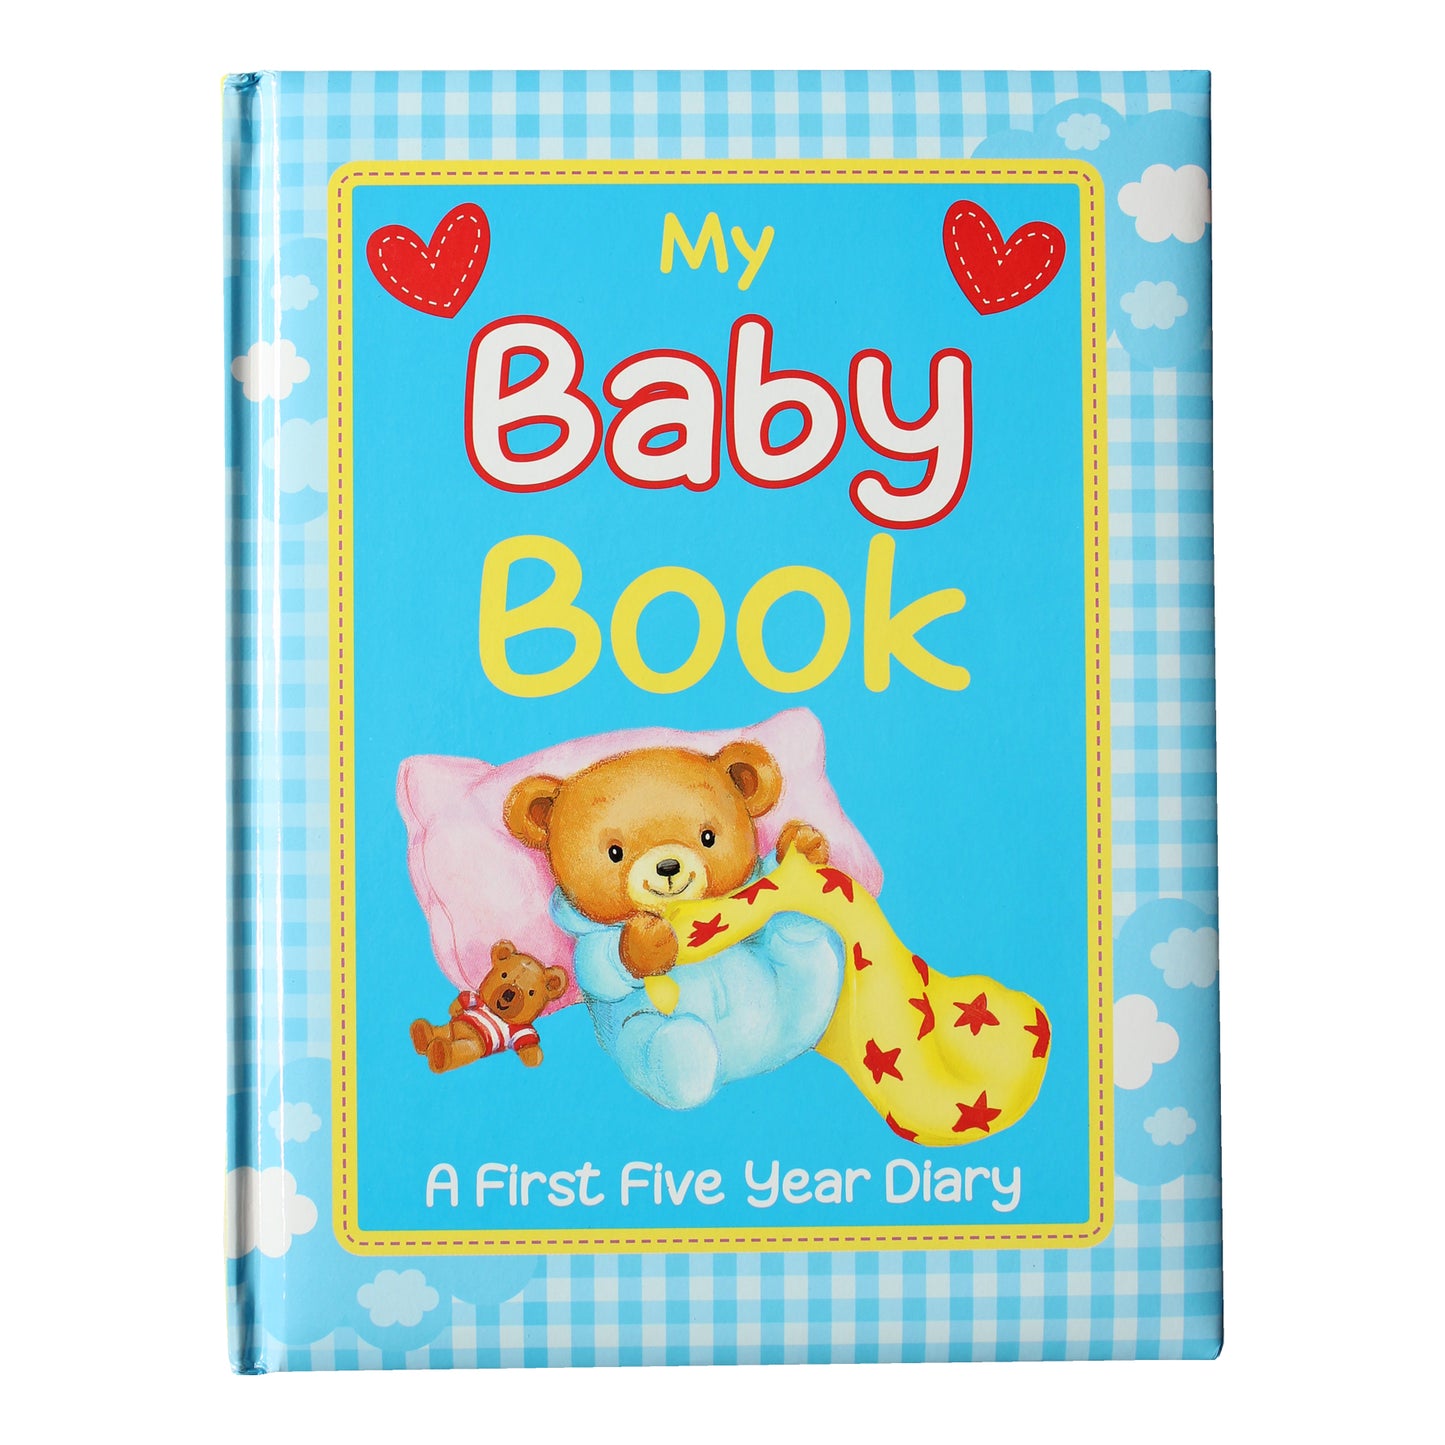 My Baby Book: A First Five Year Diary  (Blue) - Hard Cover